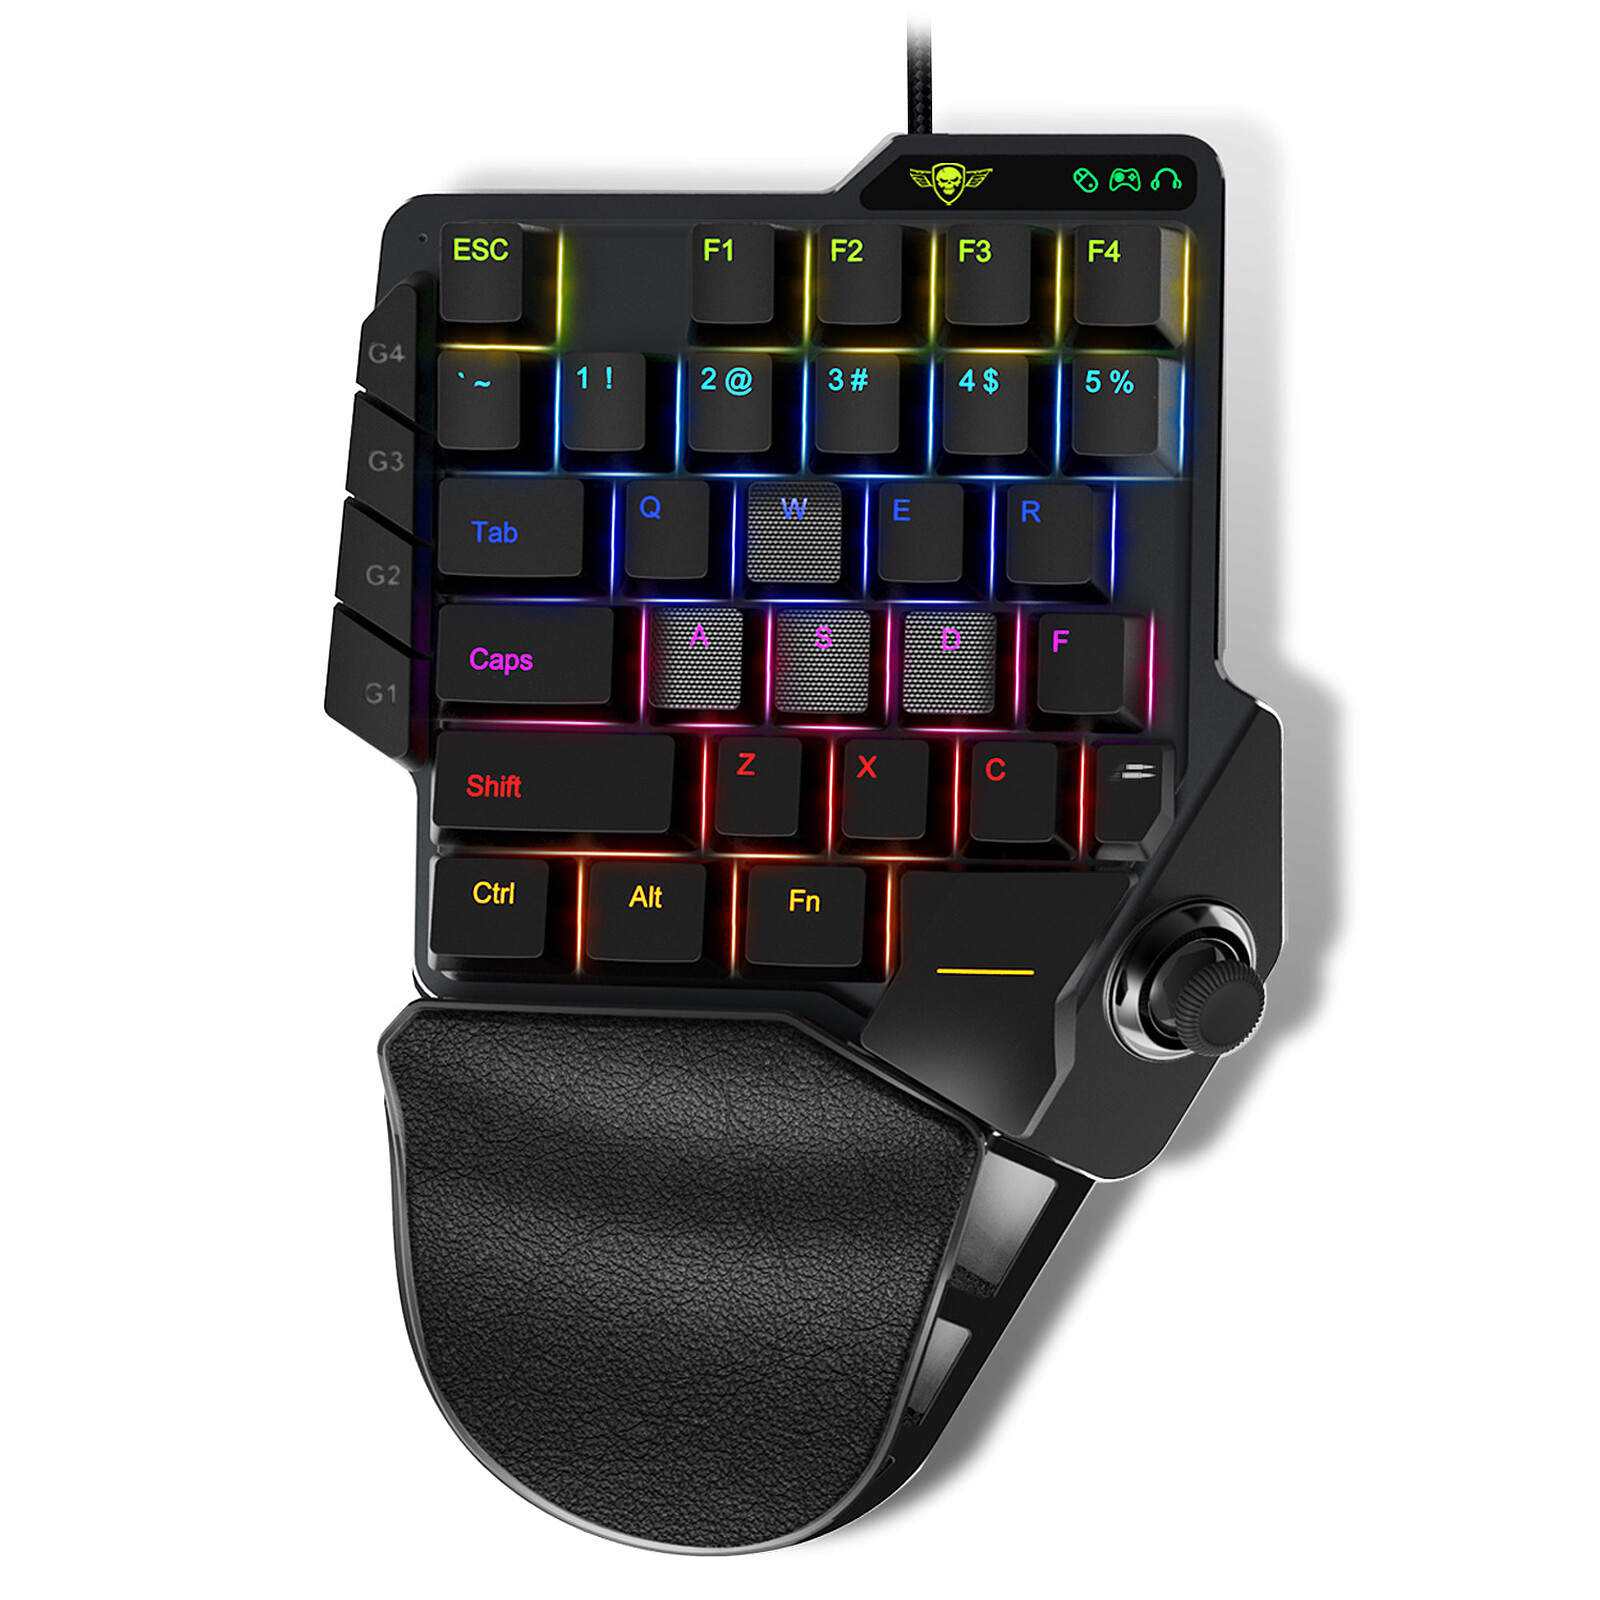 Pack clavier souris sans fil xpert wireless gameboard g1100 pour xbox, ps4/ ps5, switch, pc SPIRIT